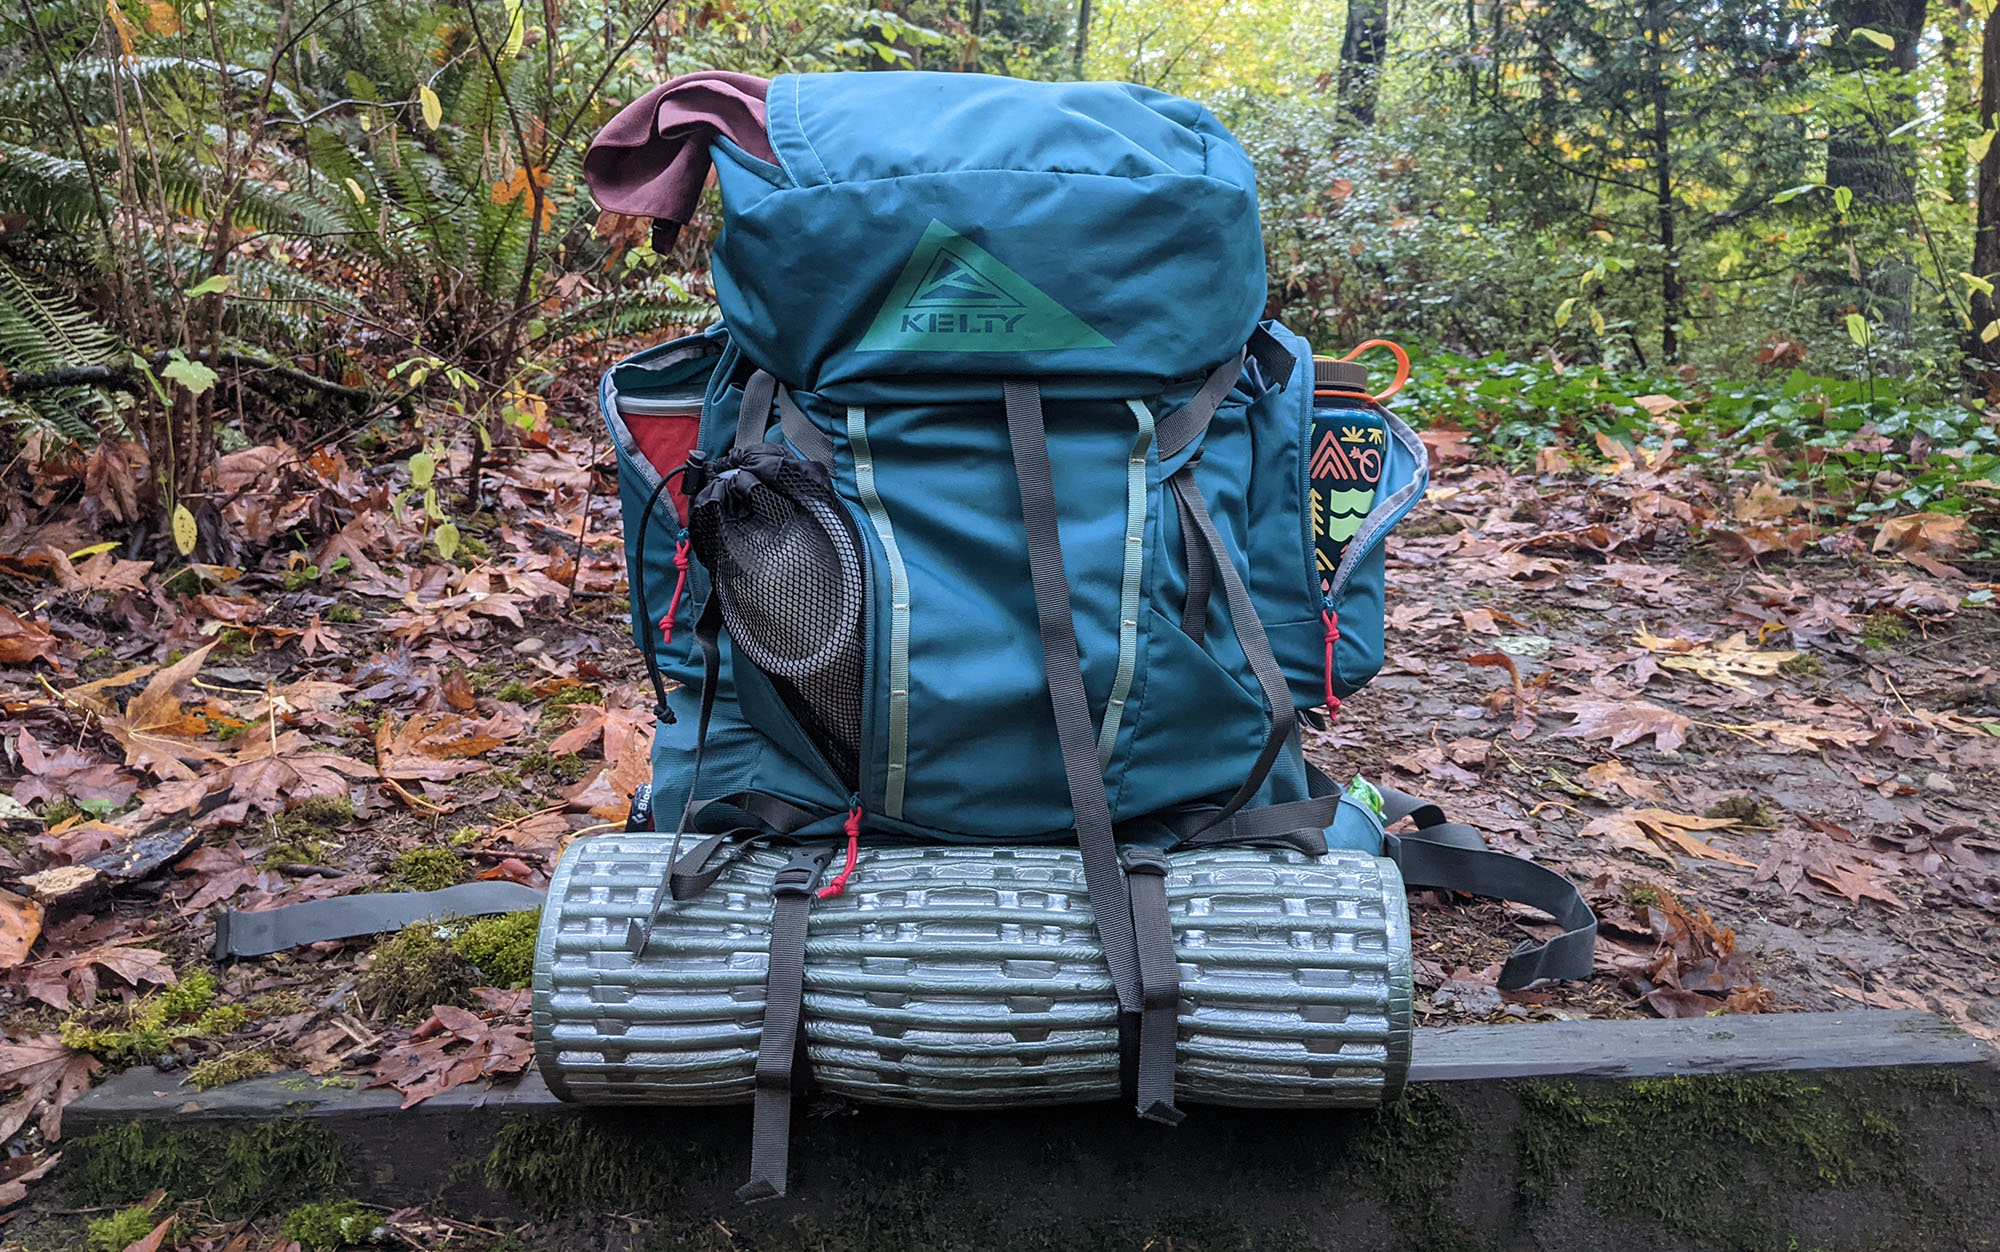 The Kelty Coyote is a budget backpacking pack.